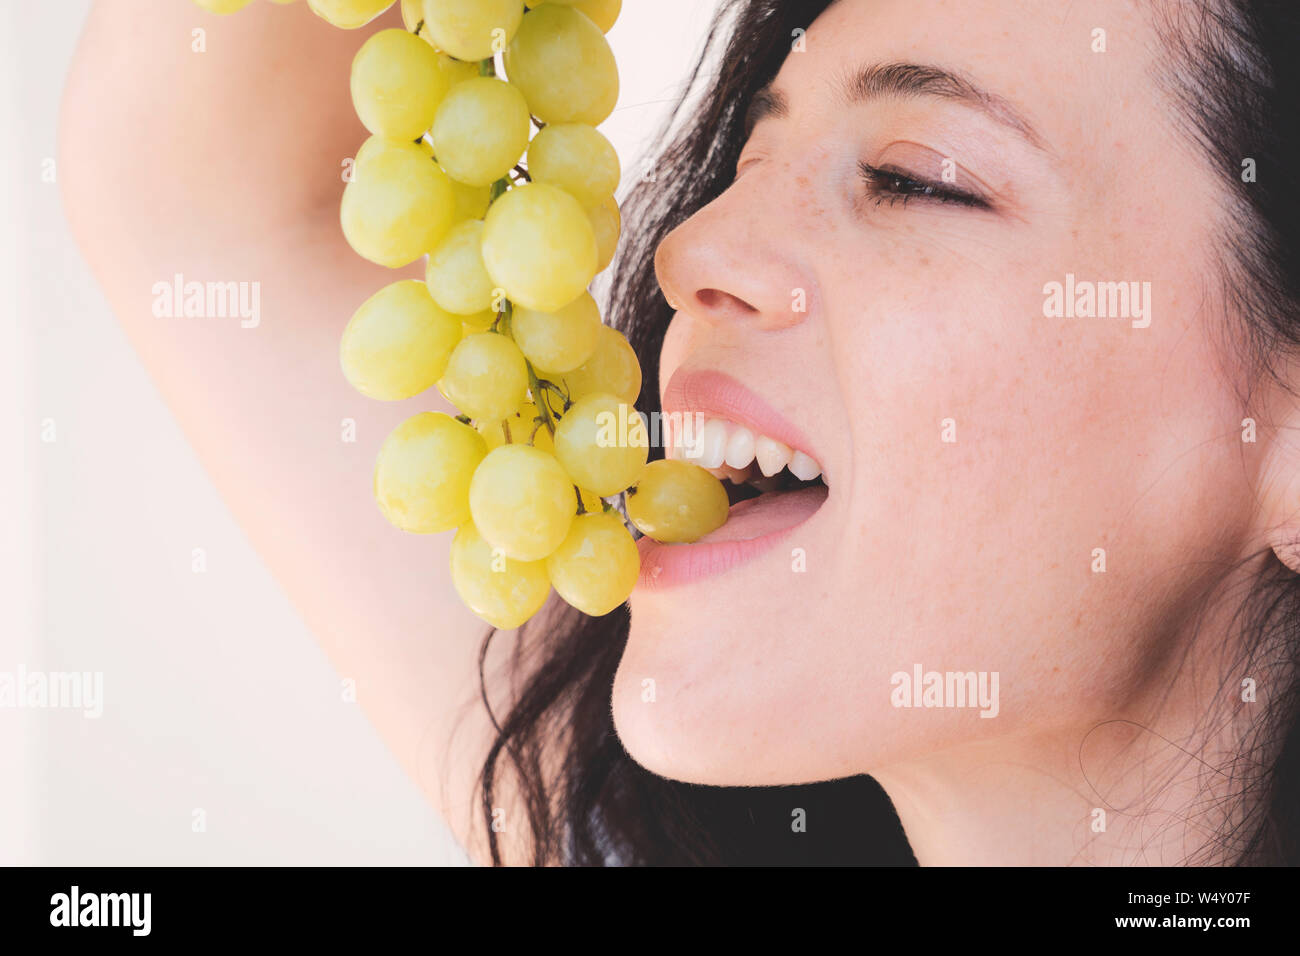 Attractive beautiful woman lifted her head up holding bunch grapes over mouth open Stock Photo